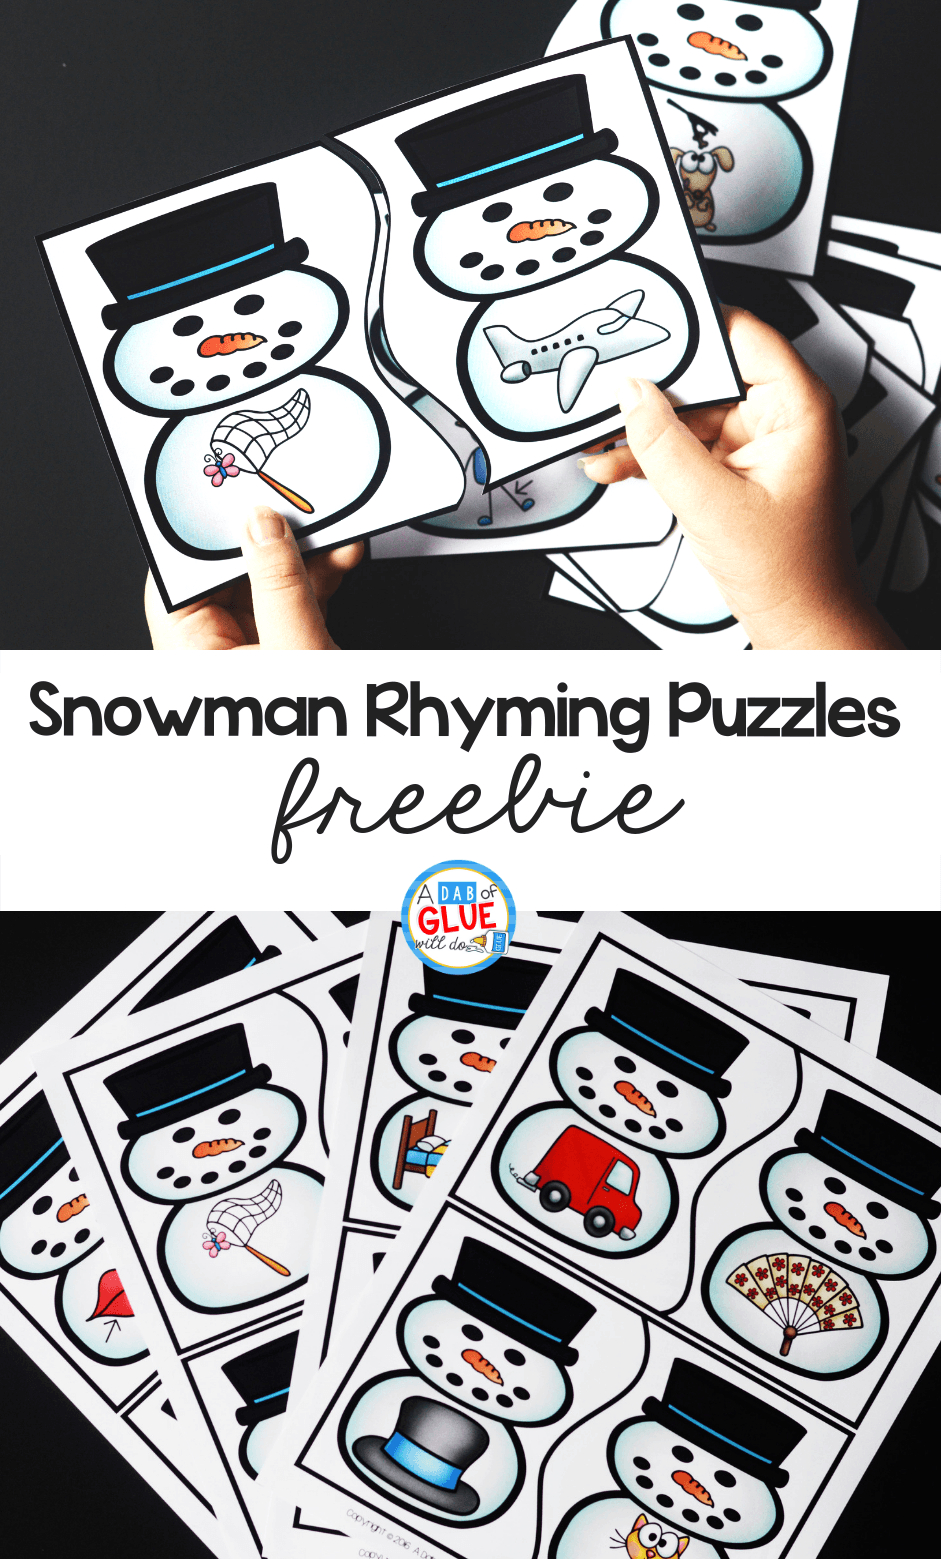 Snowman Rhyming Puzzles - A Dab Of Glue Will Do - Printable Rhyming Puzzles